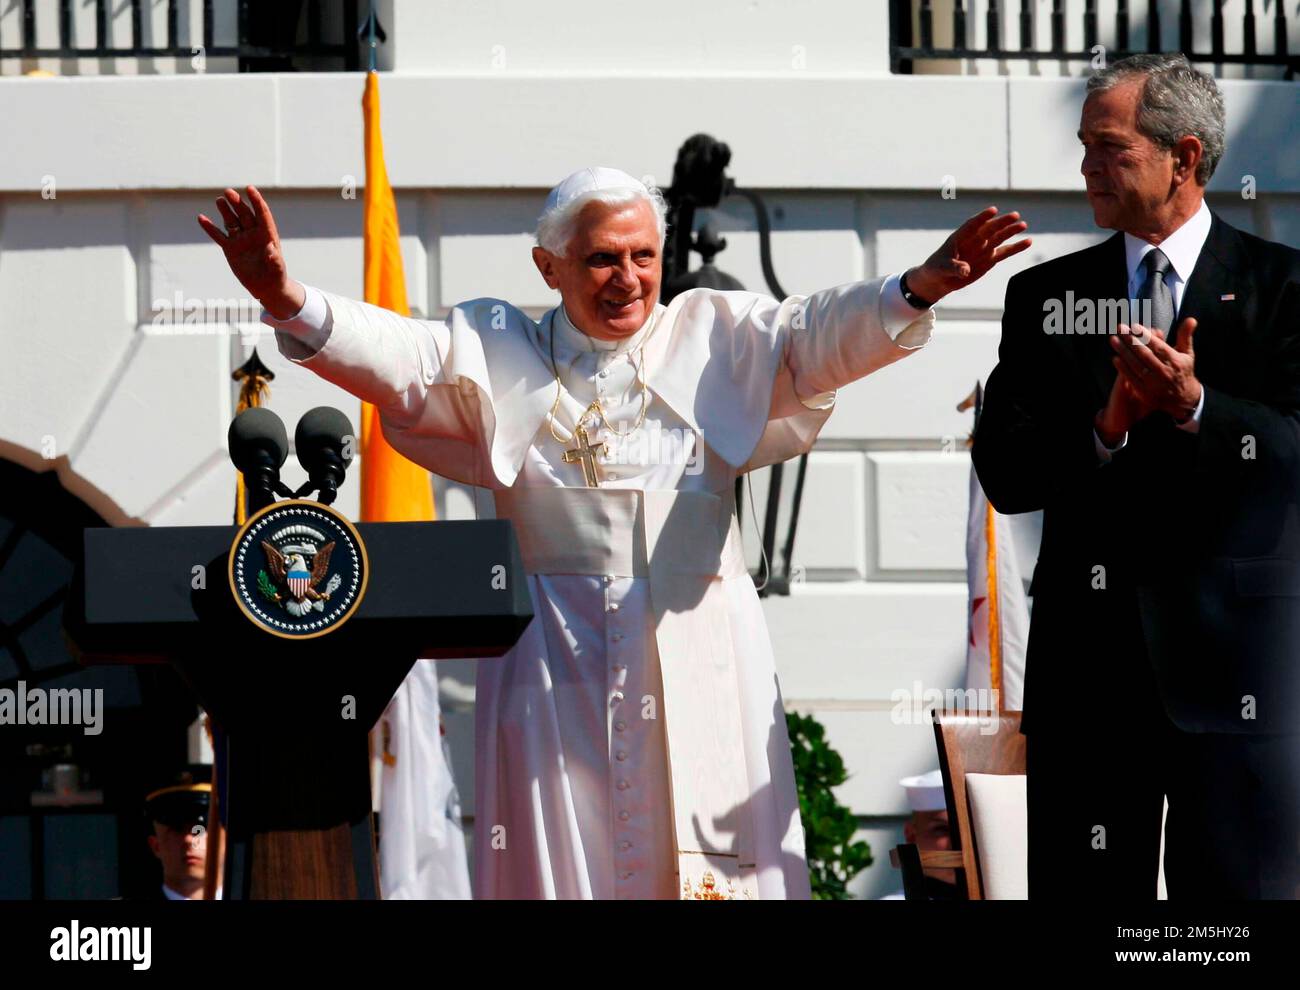 Pope Benedict XVI blesses the crowd after arriving for the Arrival Ceremony hosted by United States President George W. Bush and first lady Laura Bush on the South Lawn of the White House, Washington DC, April 16, 2008.. Credit: Aude Guerrucci / Pool via CNP Stock Photo